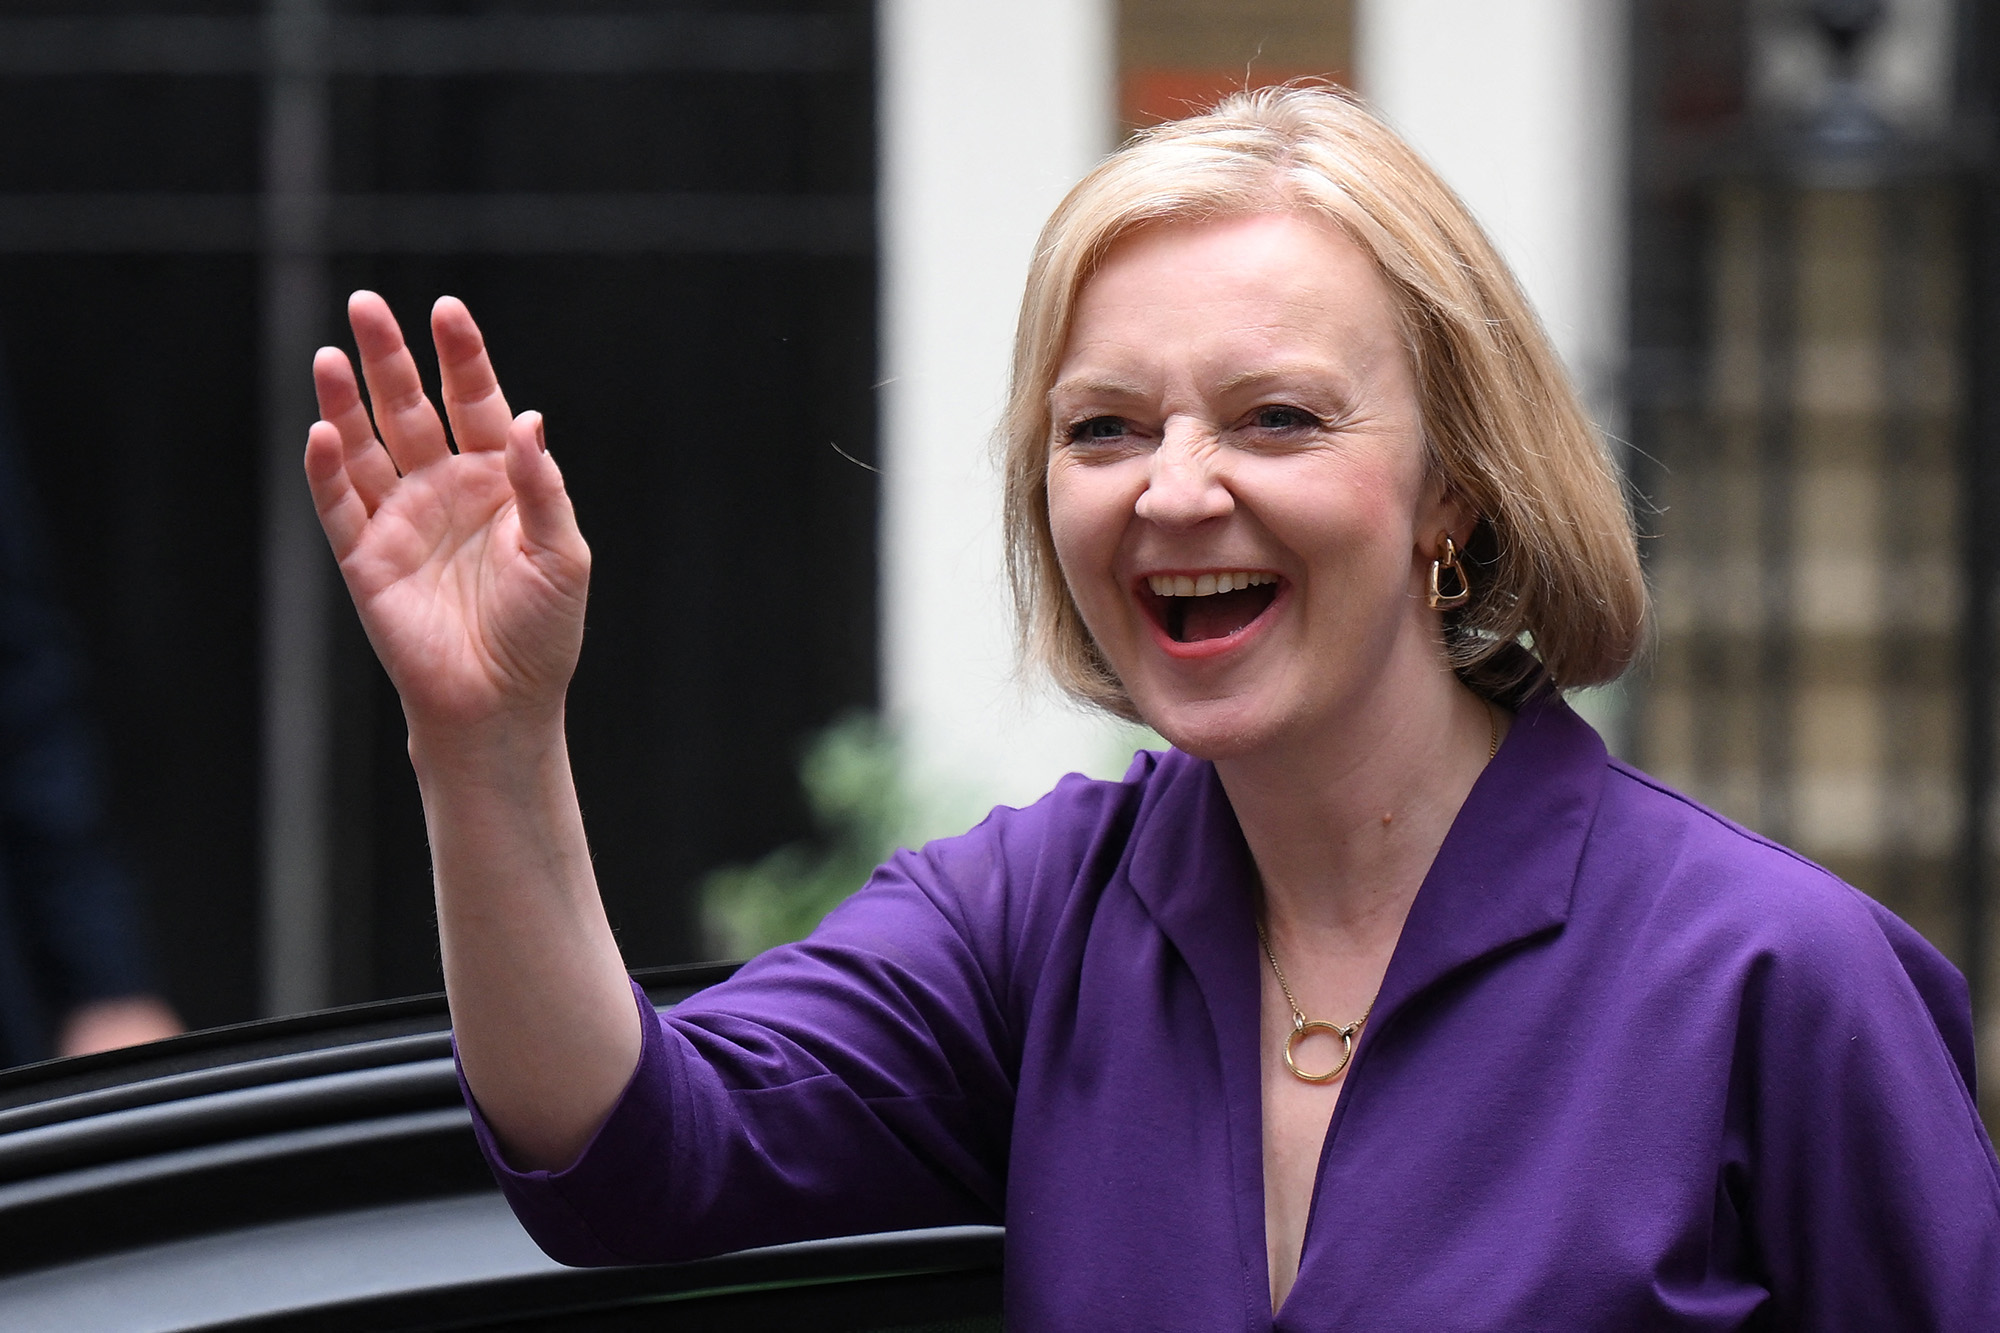 New Conservative Party leader and incoming prime minister Liz Truss smiles and waves as she arrives at Conservative Party Headquarters in central London having been announced the winner of the Conservative Party leadership contest at an event in central London, on September 5.